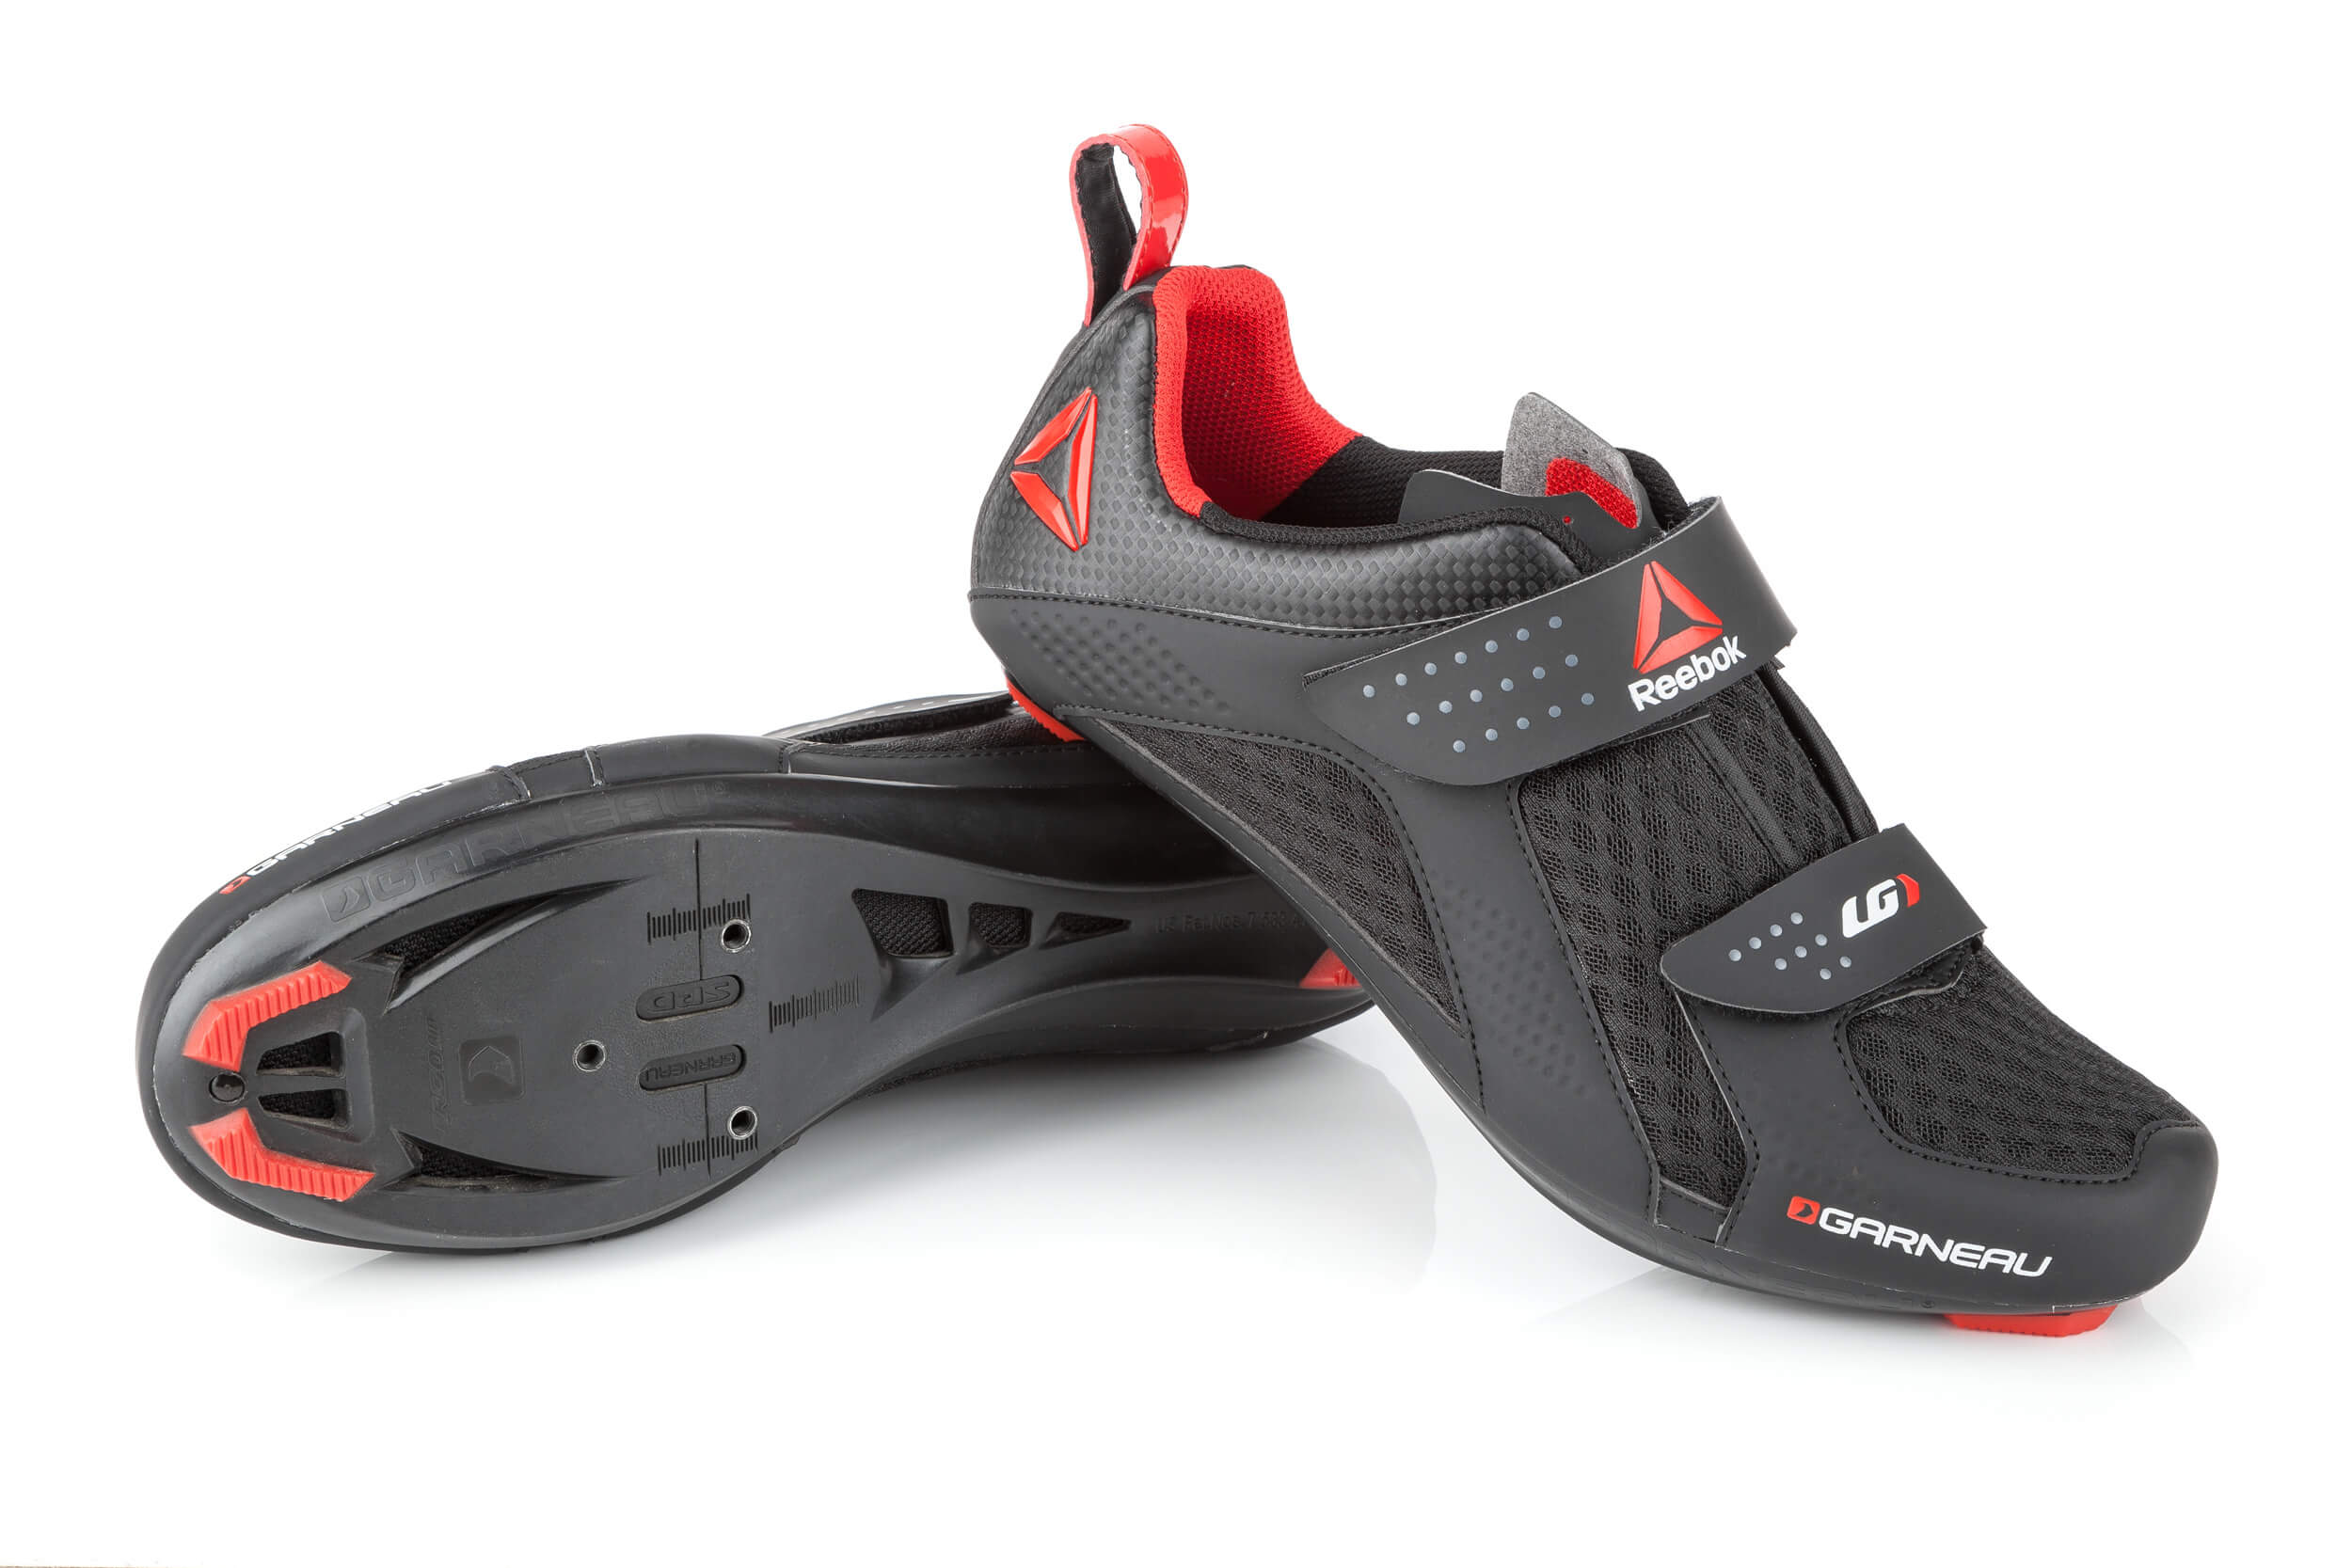 Garneau and Reebok collaborate on indoor cycling shoe - Bicycle Retailer